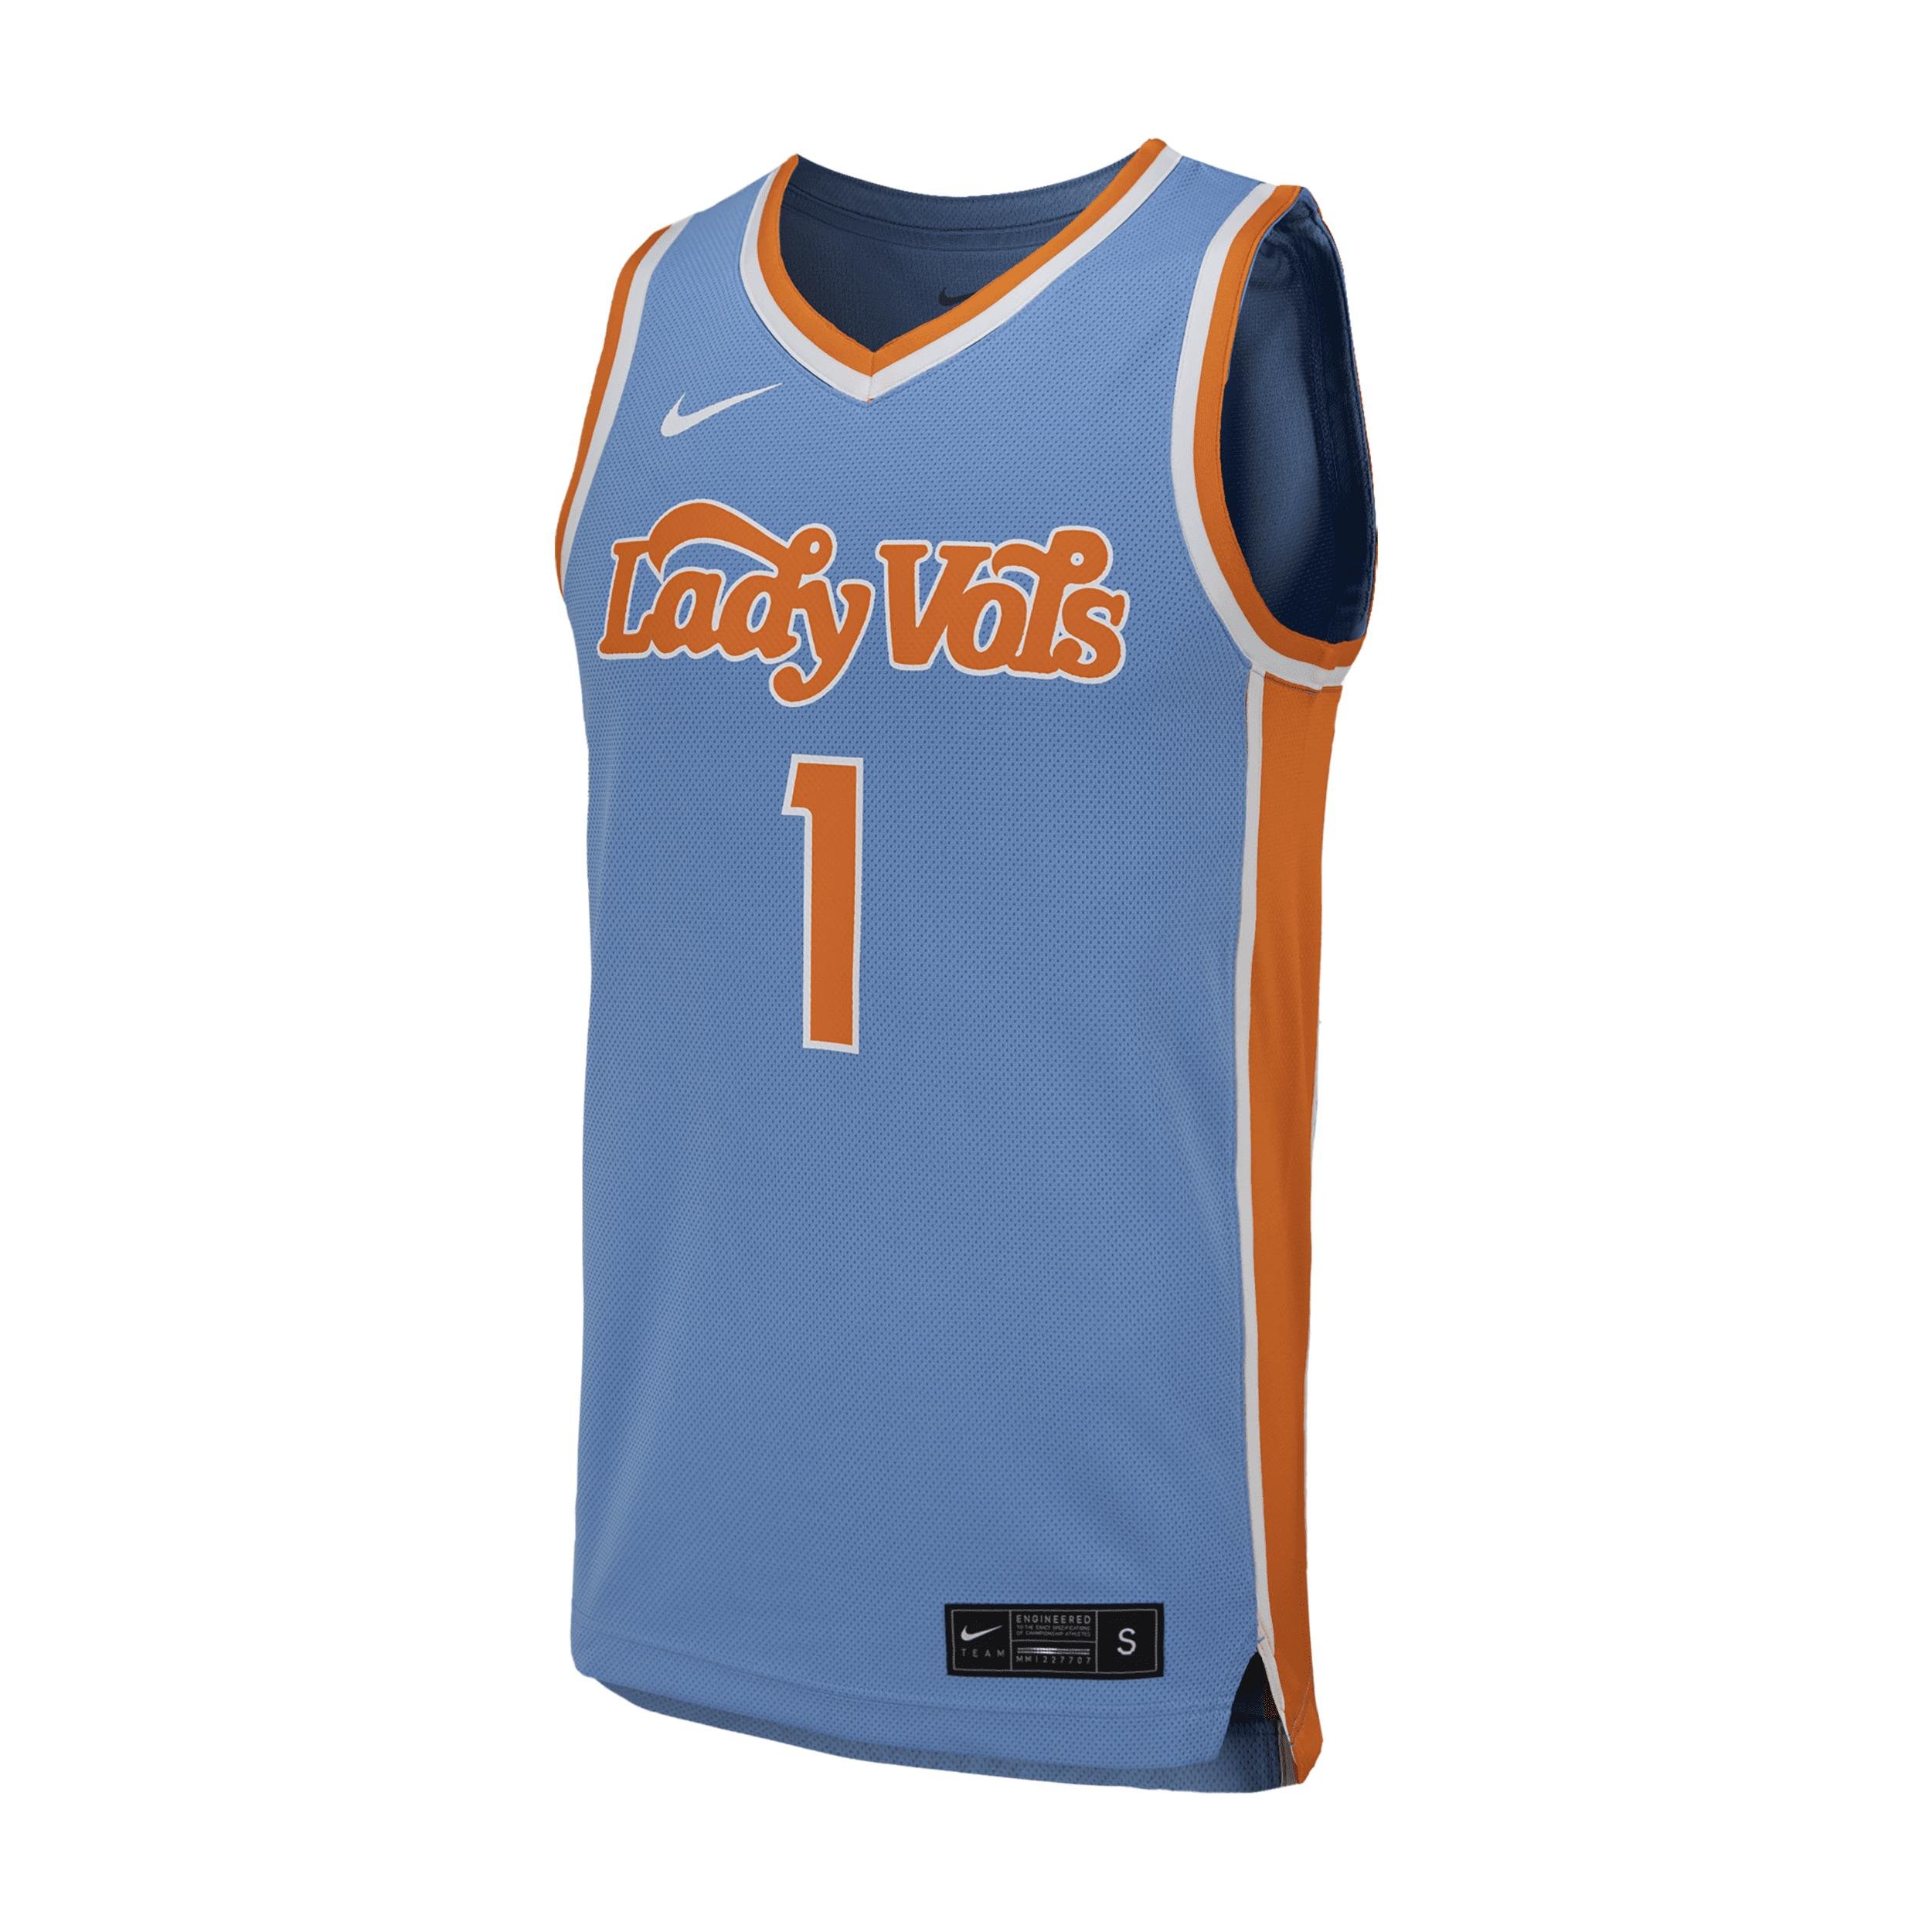 Tennessee Nike Unisex College Basketball Replica Jersey by NIKE